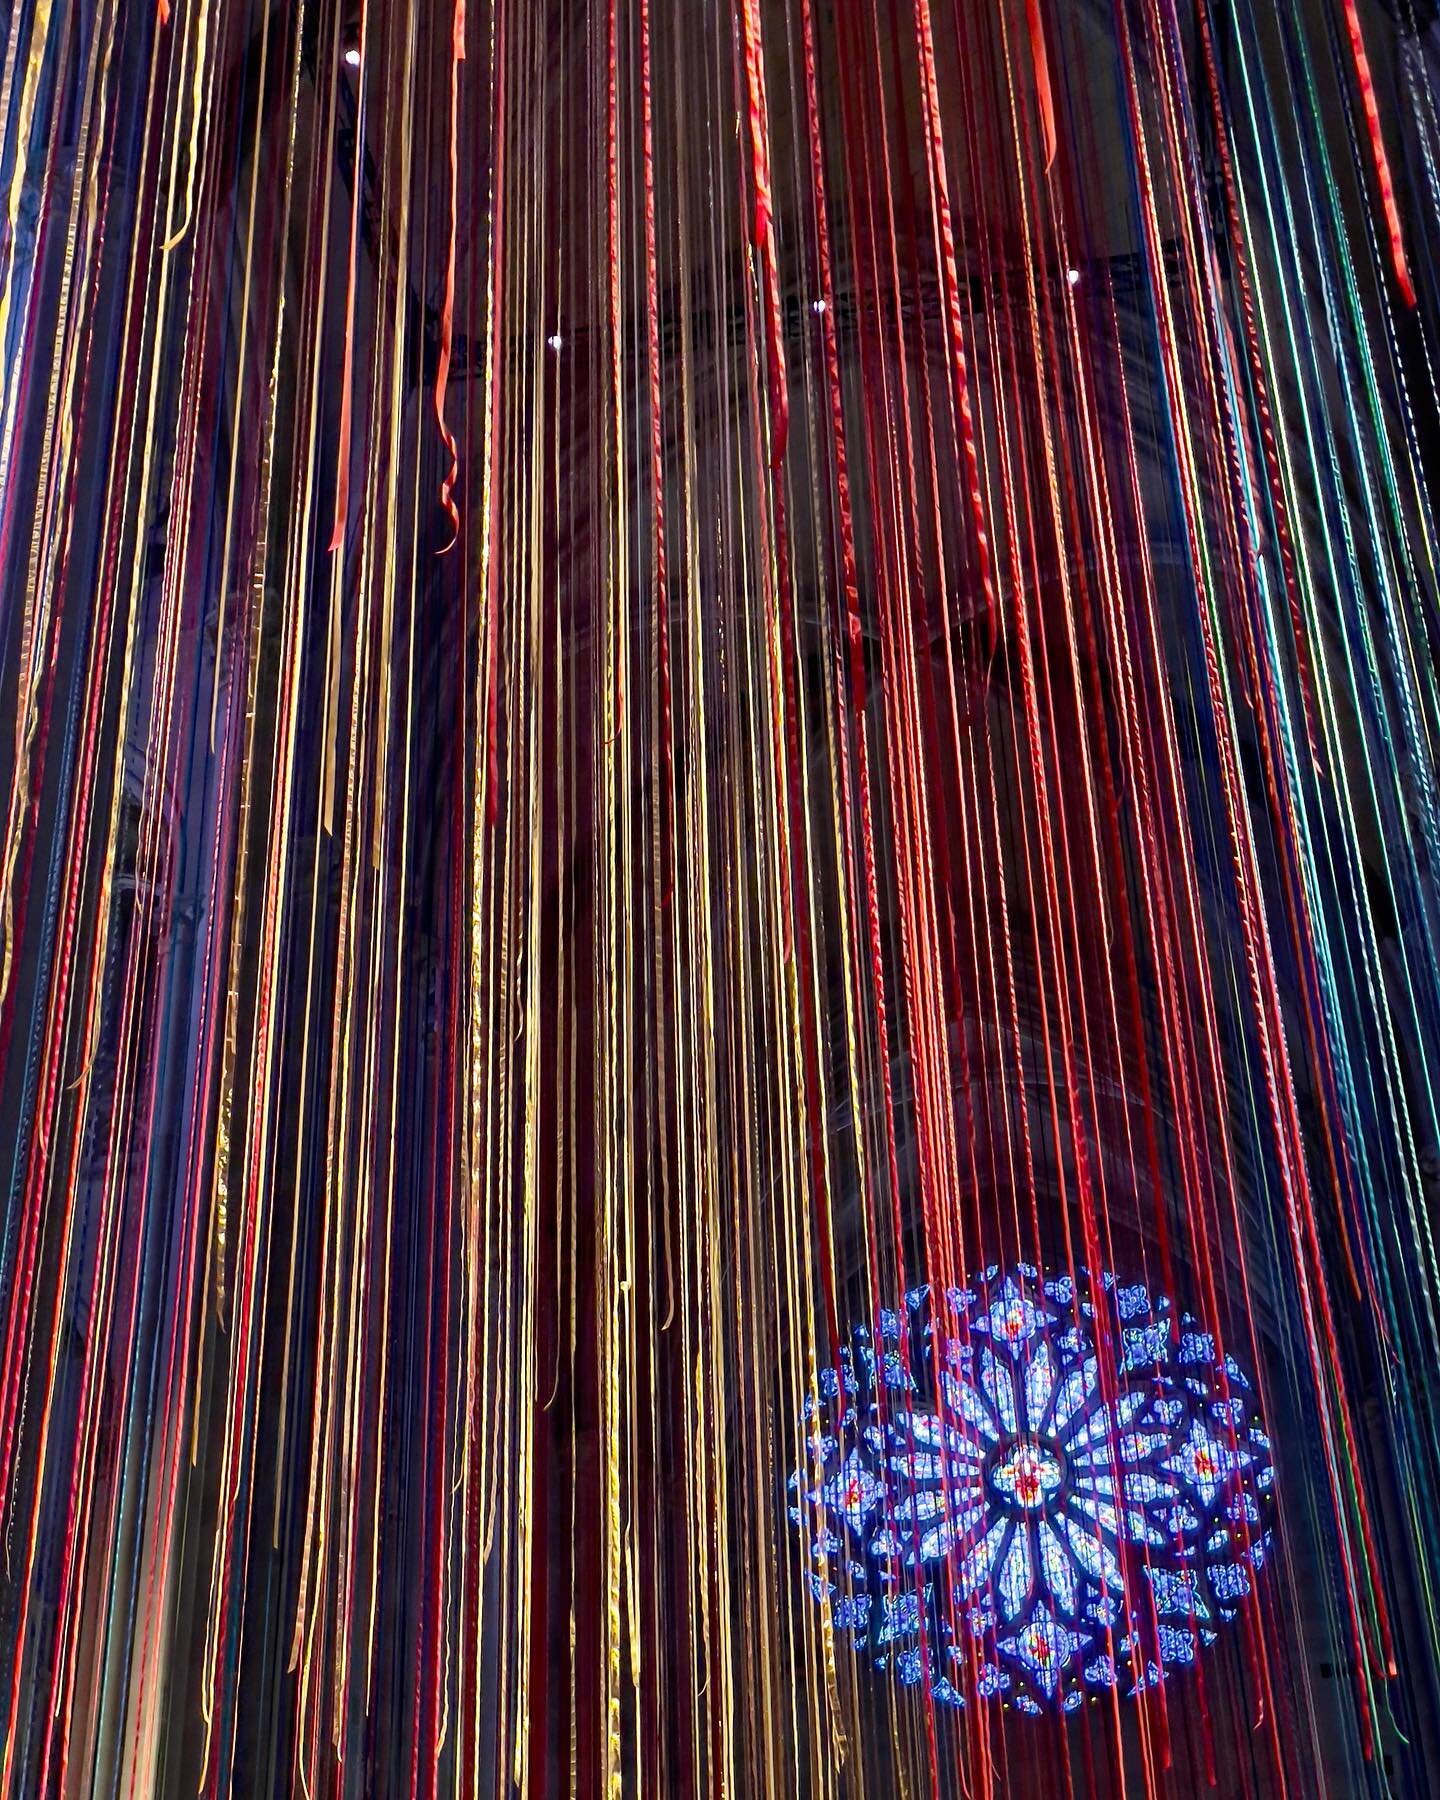 I just spent a long weekend in #newyorkcity. I&rsquo;d never been in the #cathedralofstjohnthedivine . What an incredible space, just now filled with these streaming ribbons inscribed with prayers, an installation by artist Anne Patterson. I had anot